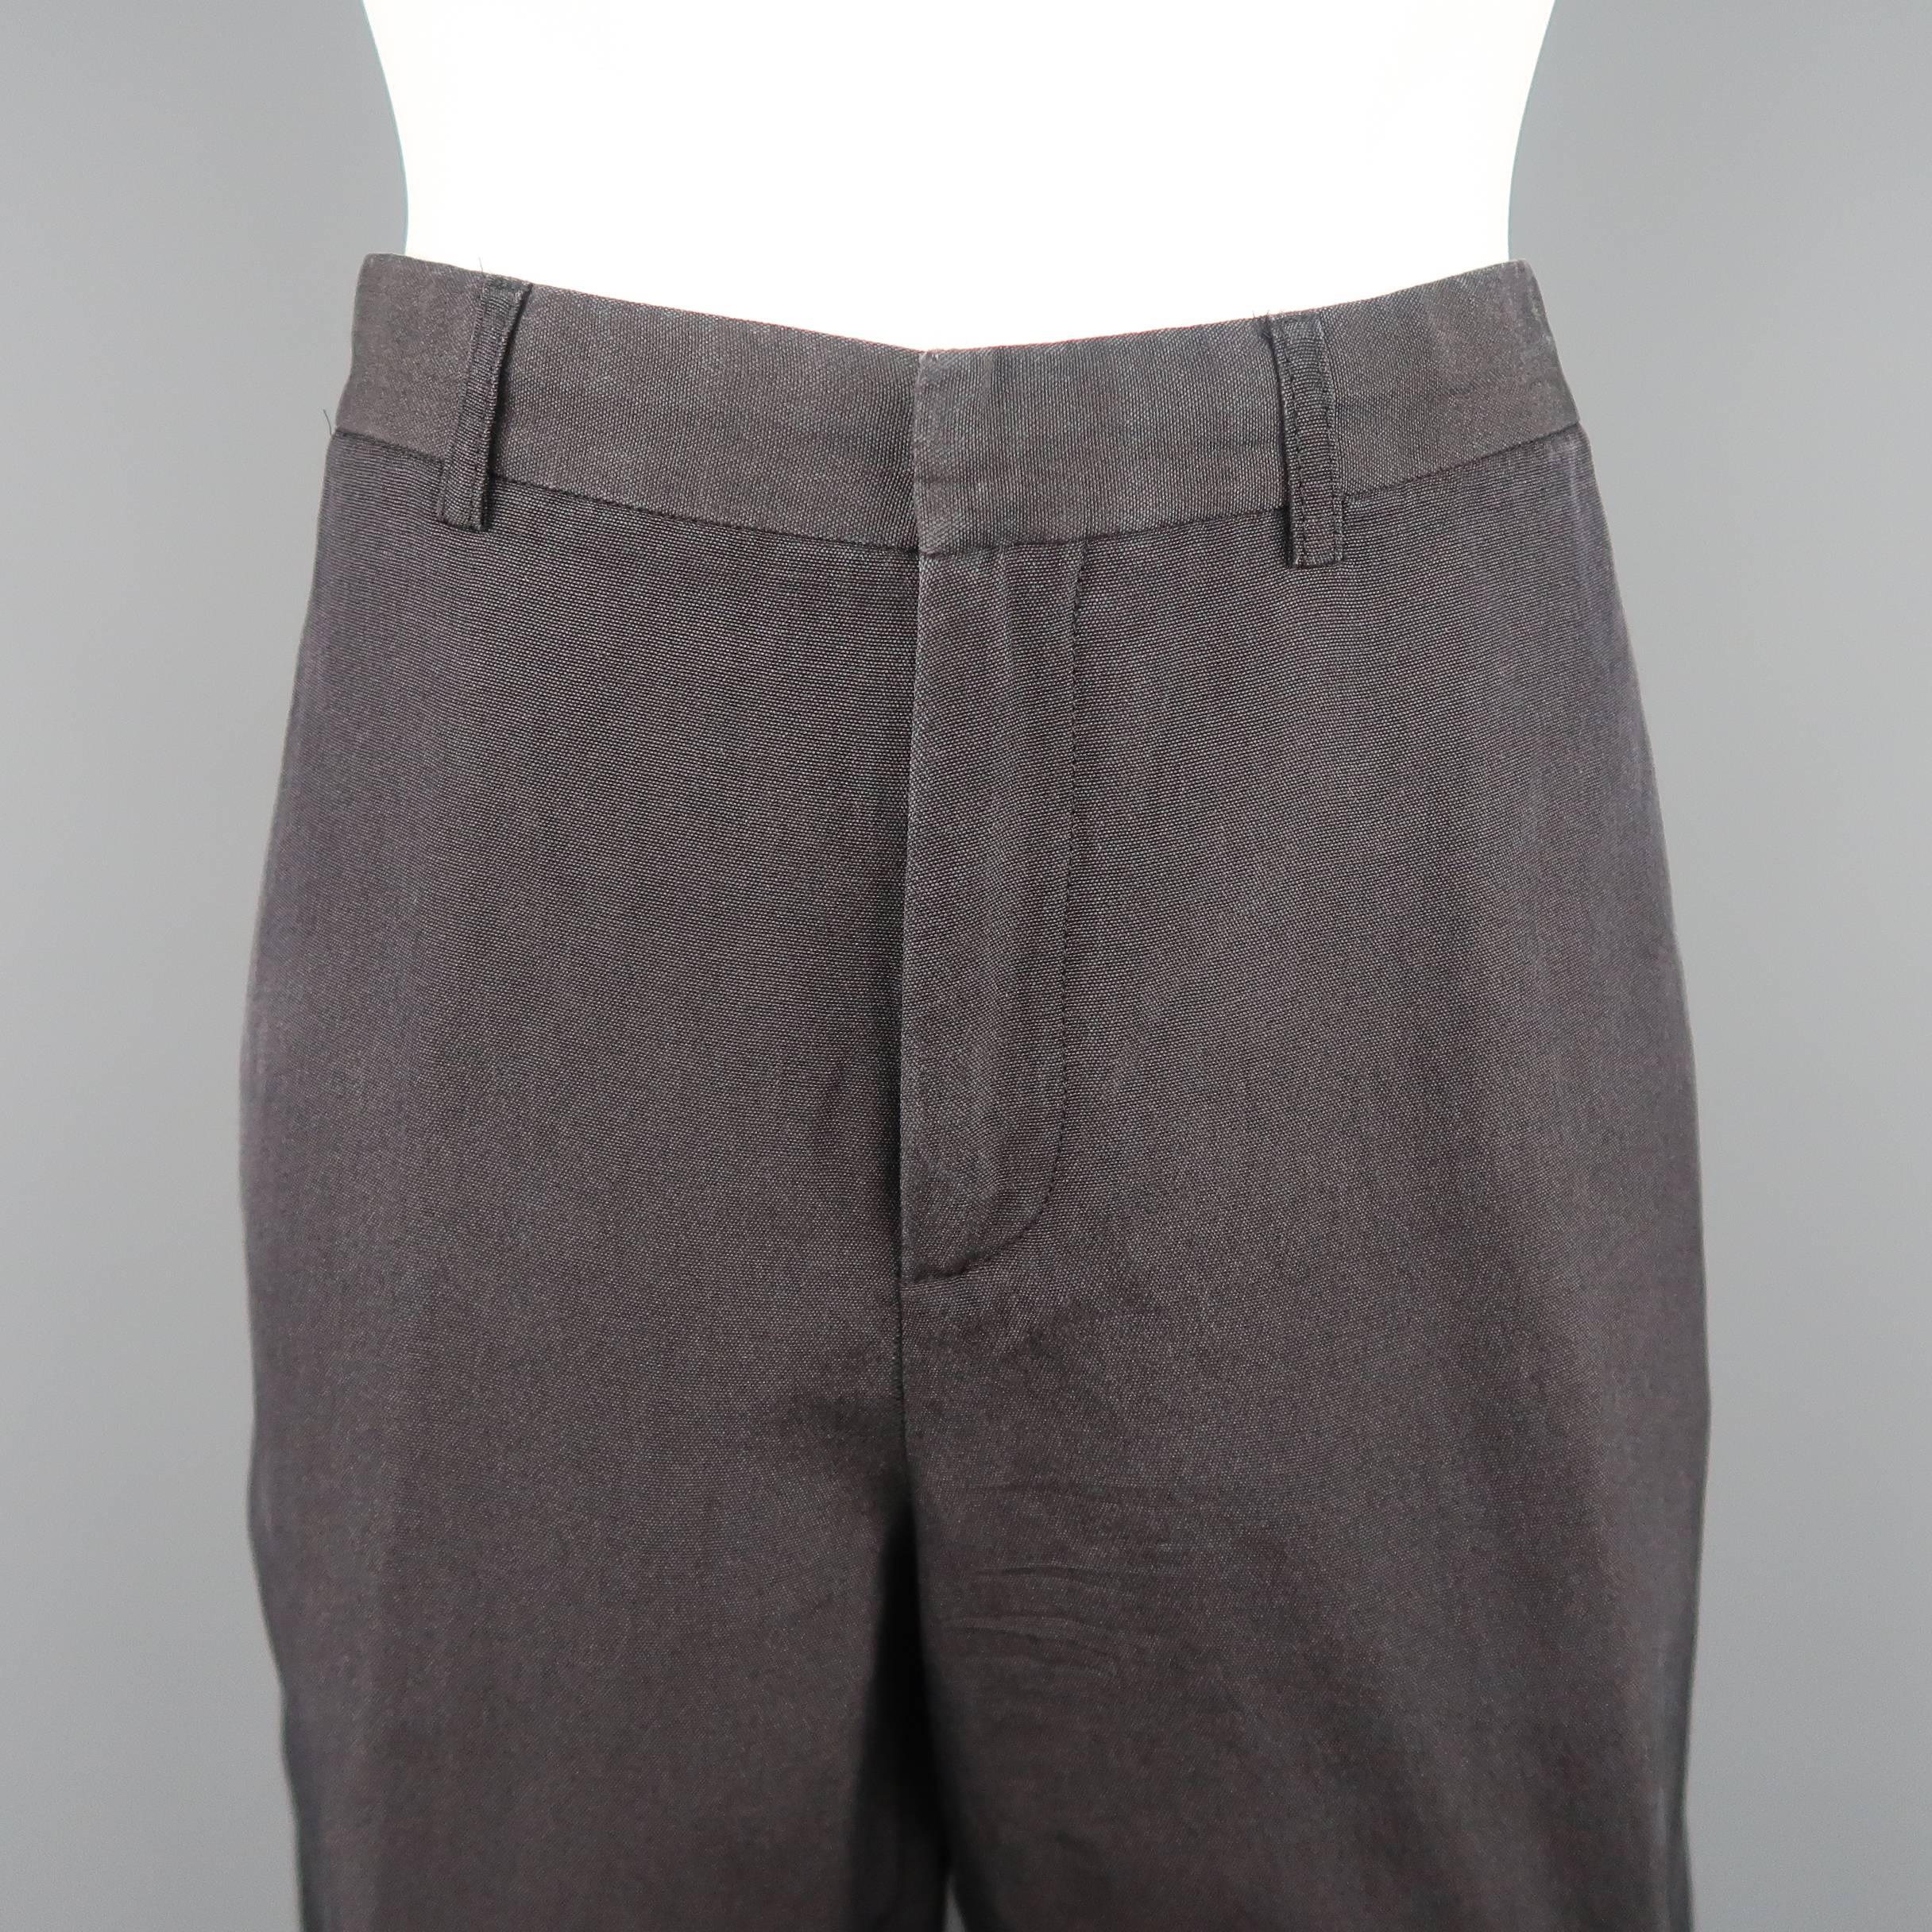 JEAN PAUL GAULTIER trousers come in washed charcoal gray canvas with a cropped hem and signature back tab. Made in Italy.
 
Good Pre-Owned Condition.
Marked: 10
 
Measurements:
 
Waist: 32 in.
Rise: 11 in.
Inseam: 20 in.
